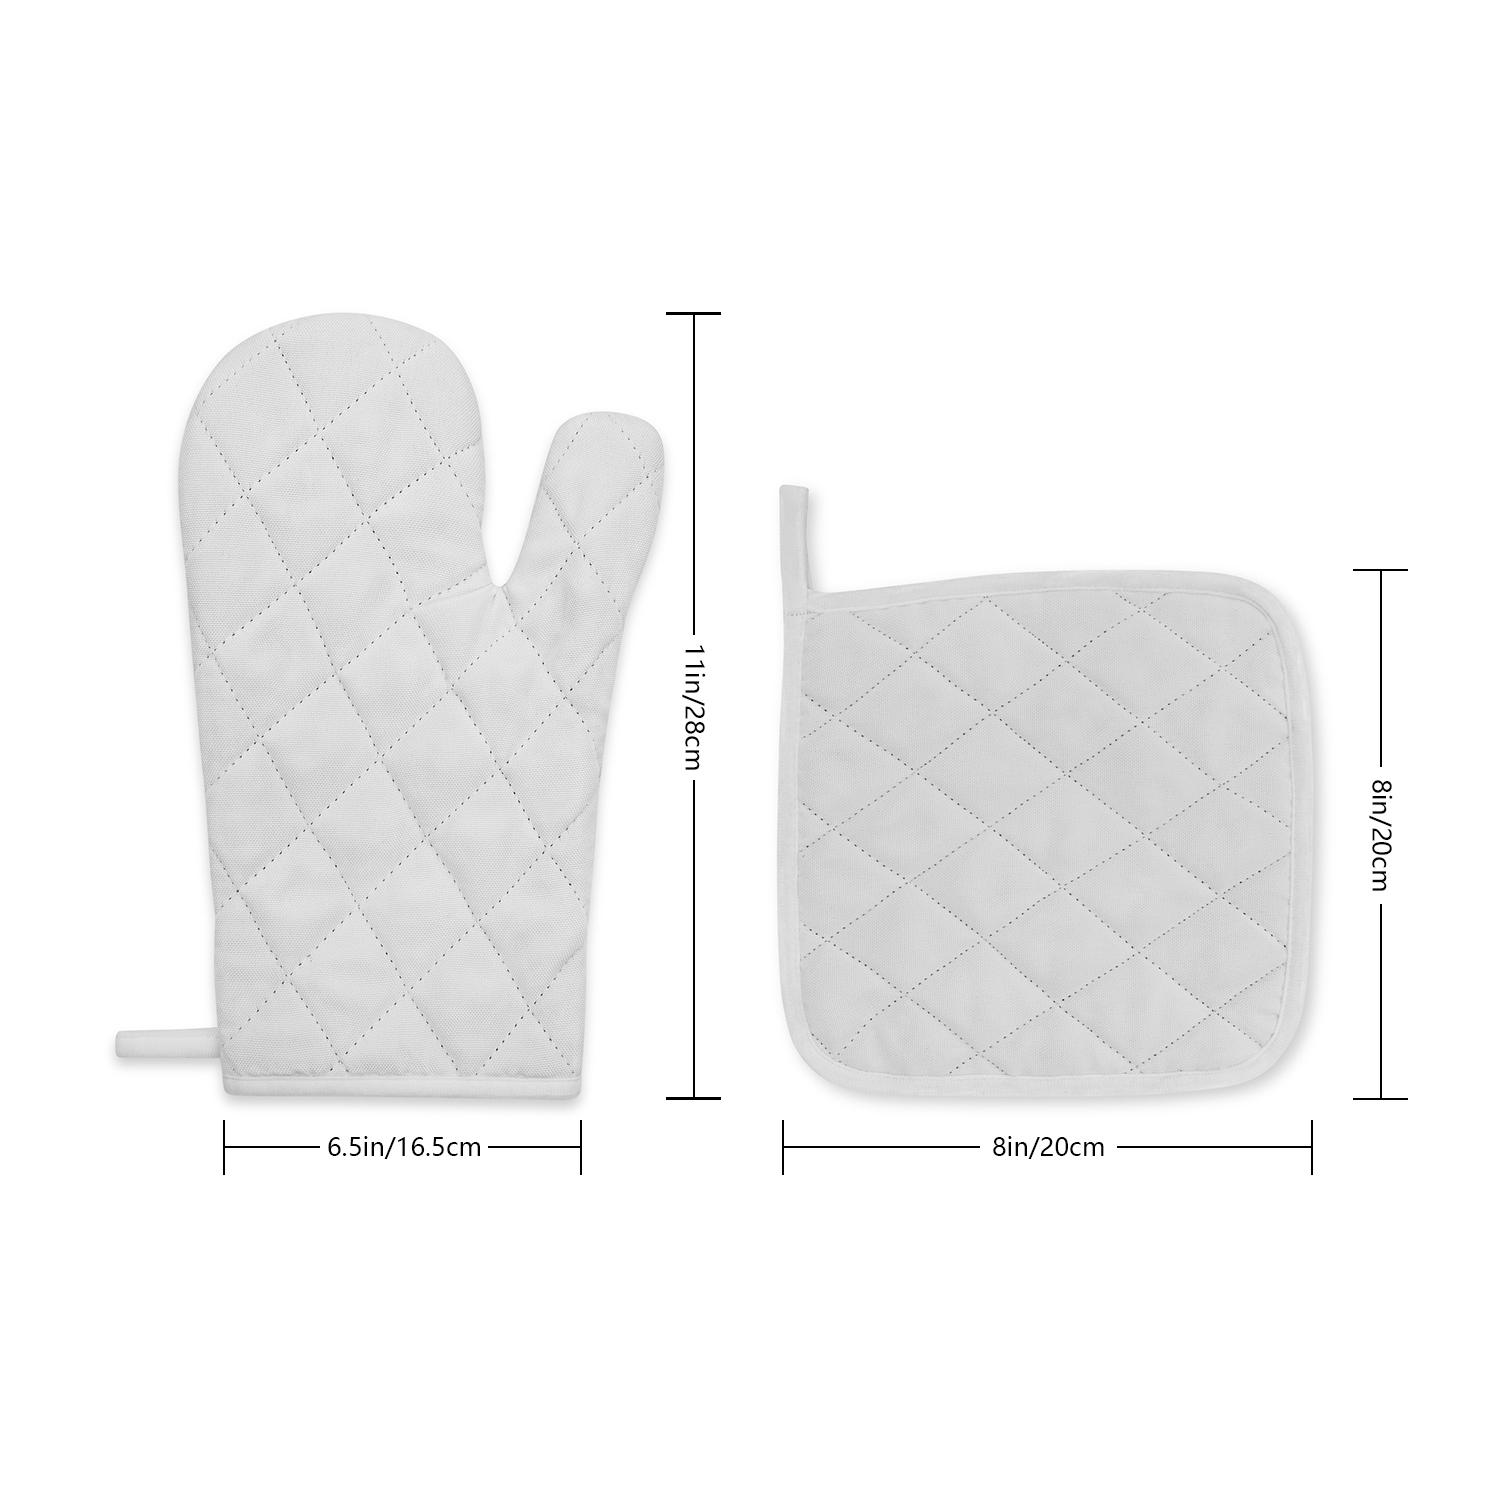 Microwave Oven Gloves & Insulation Pad | HugePOD-7